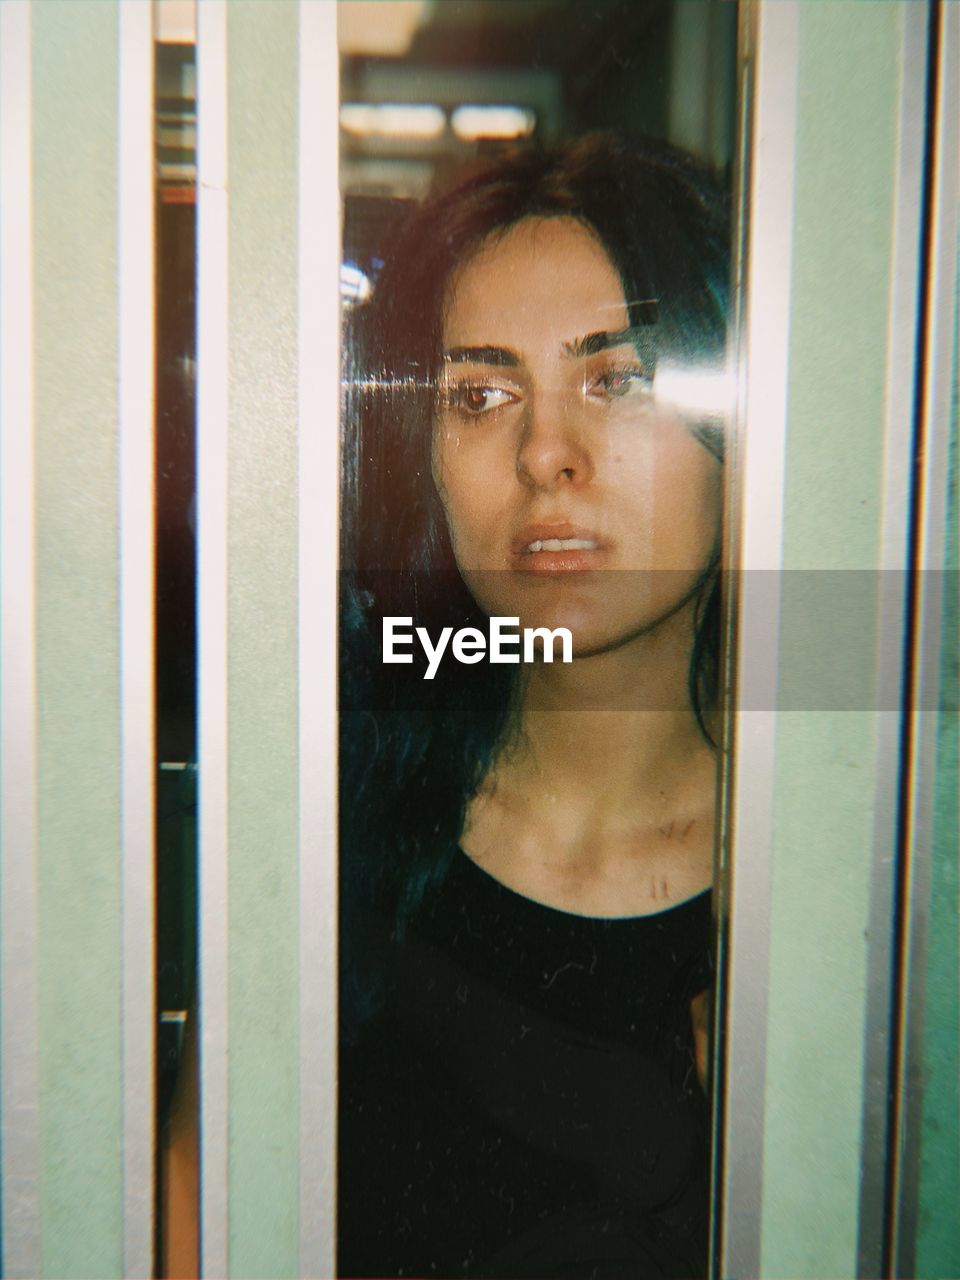 Thoughtful young woman seen through elevator